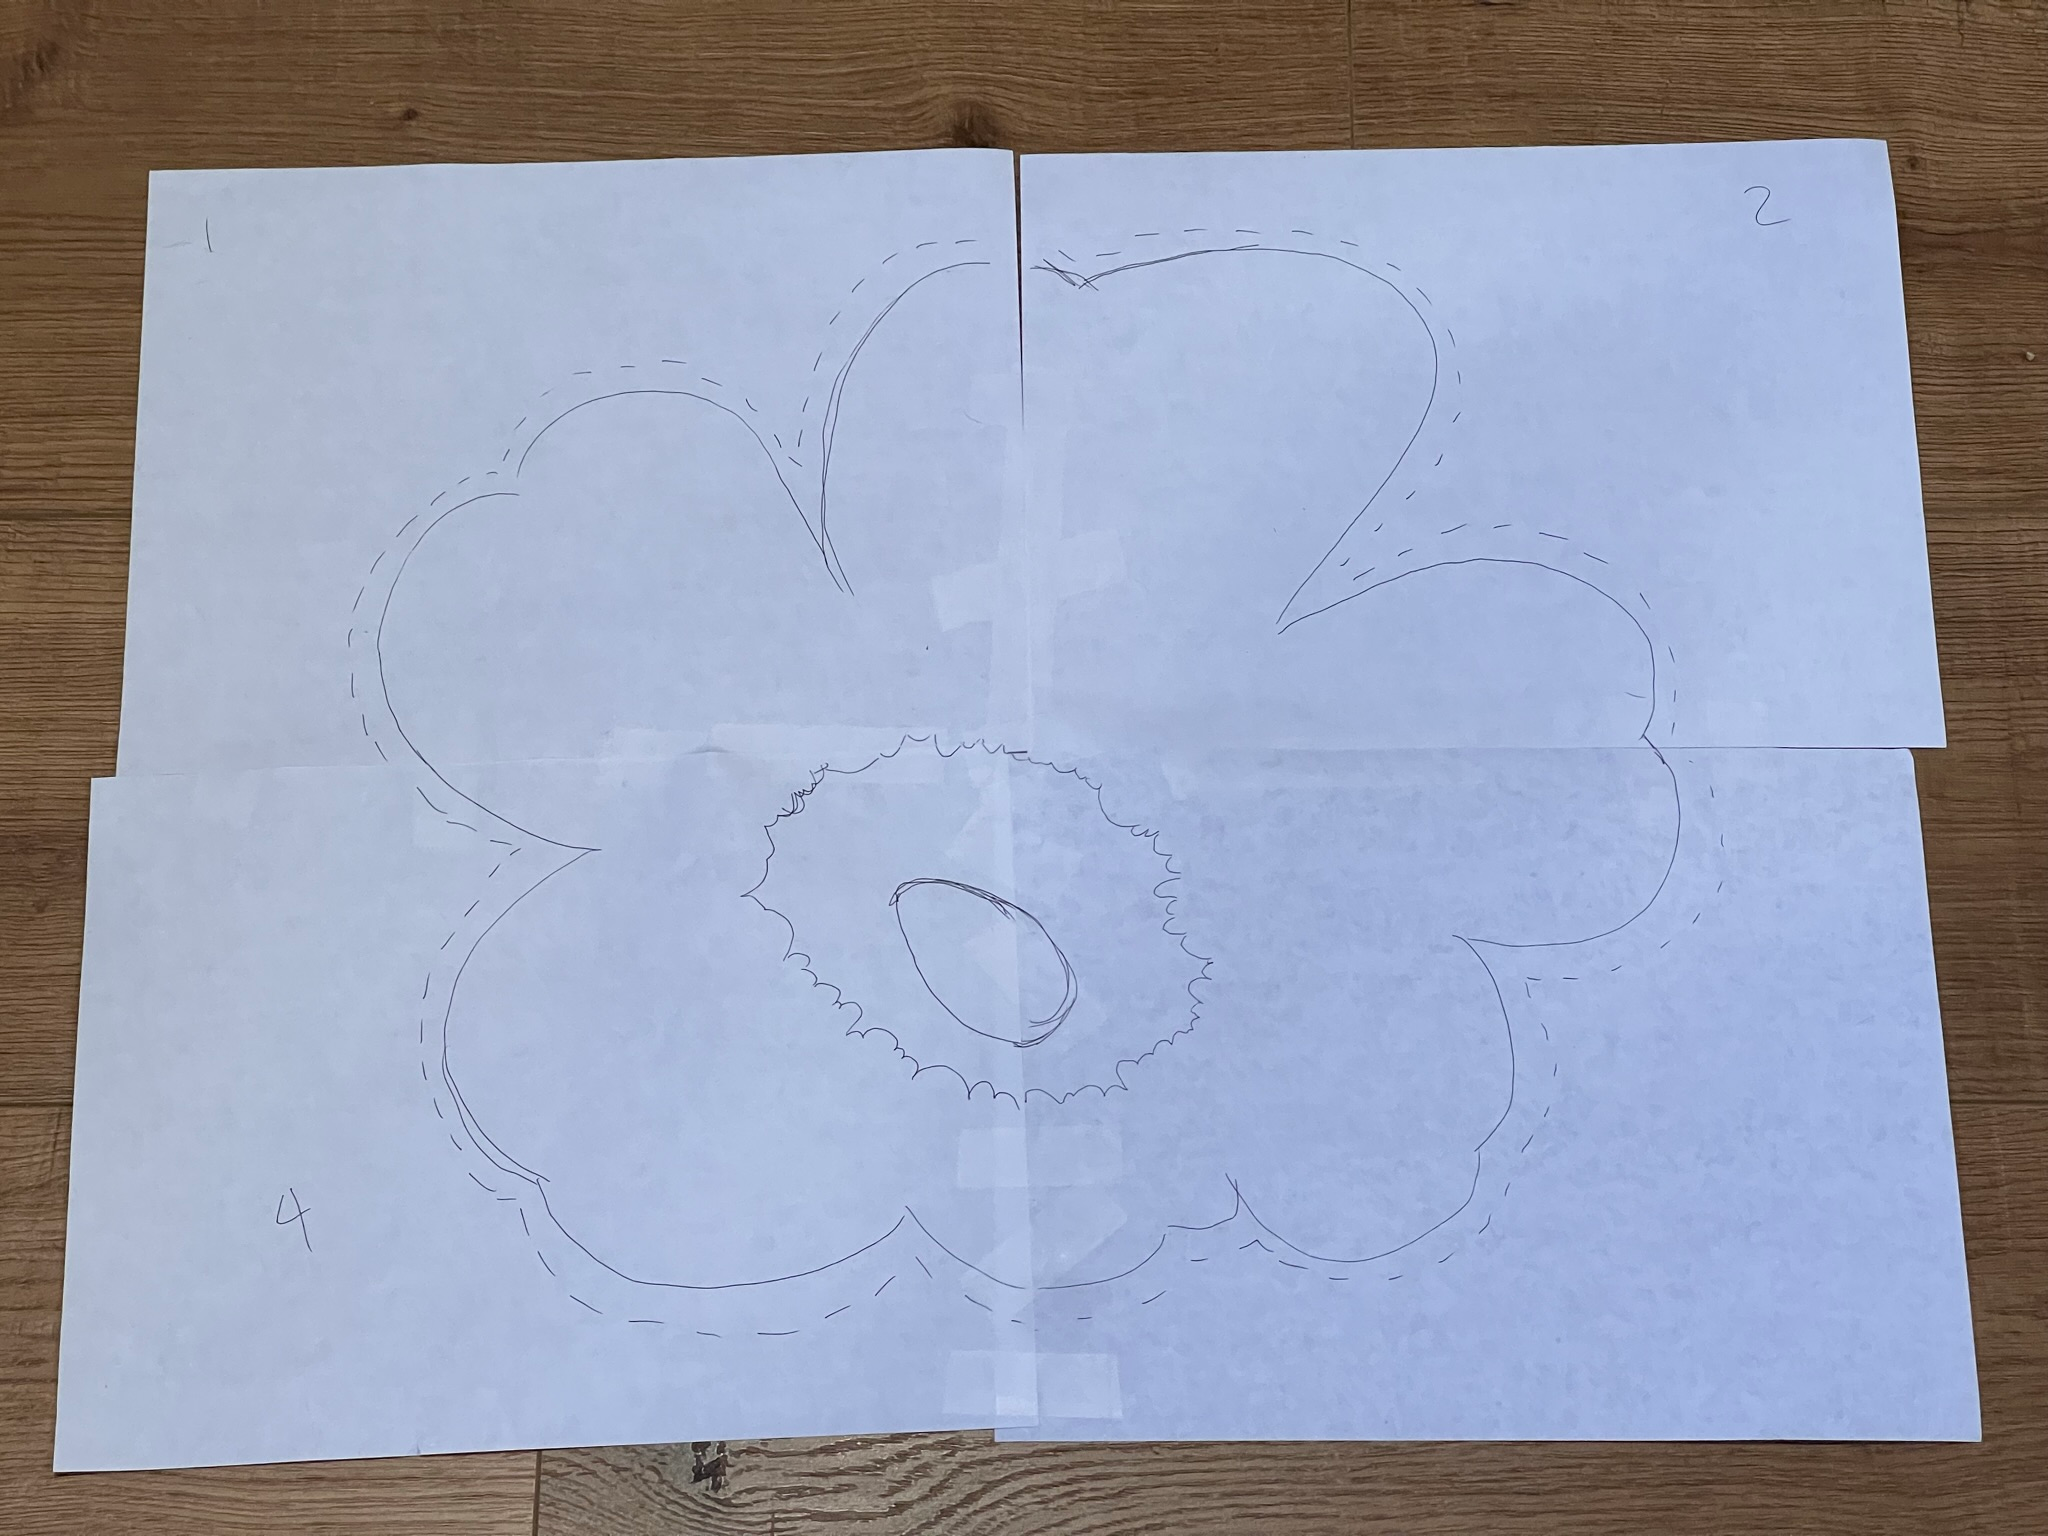 The traced flower pattern